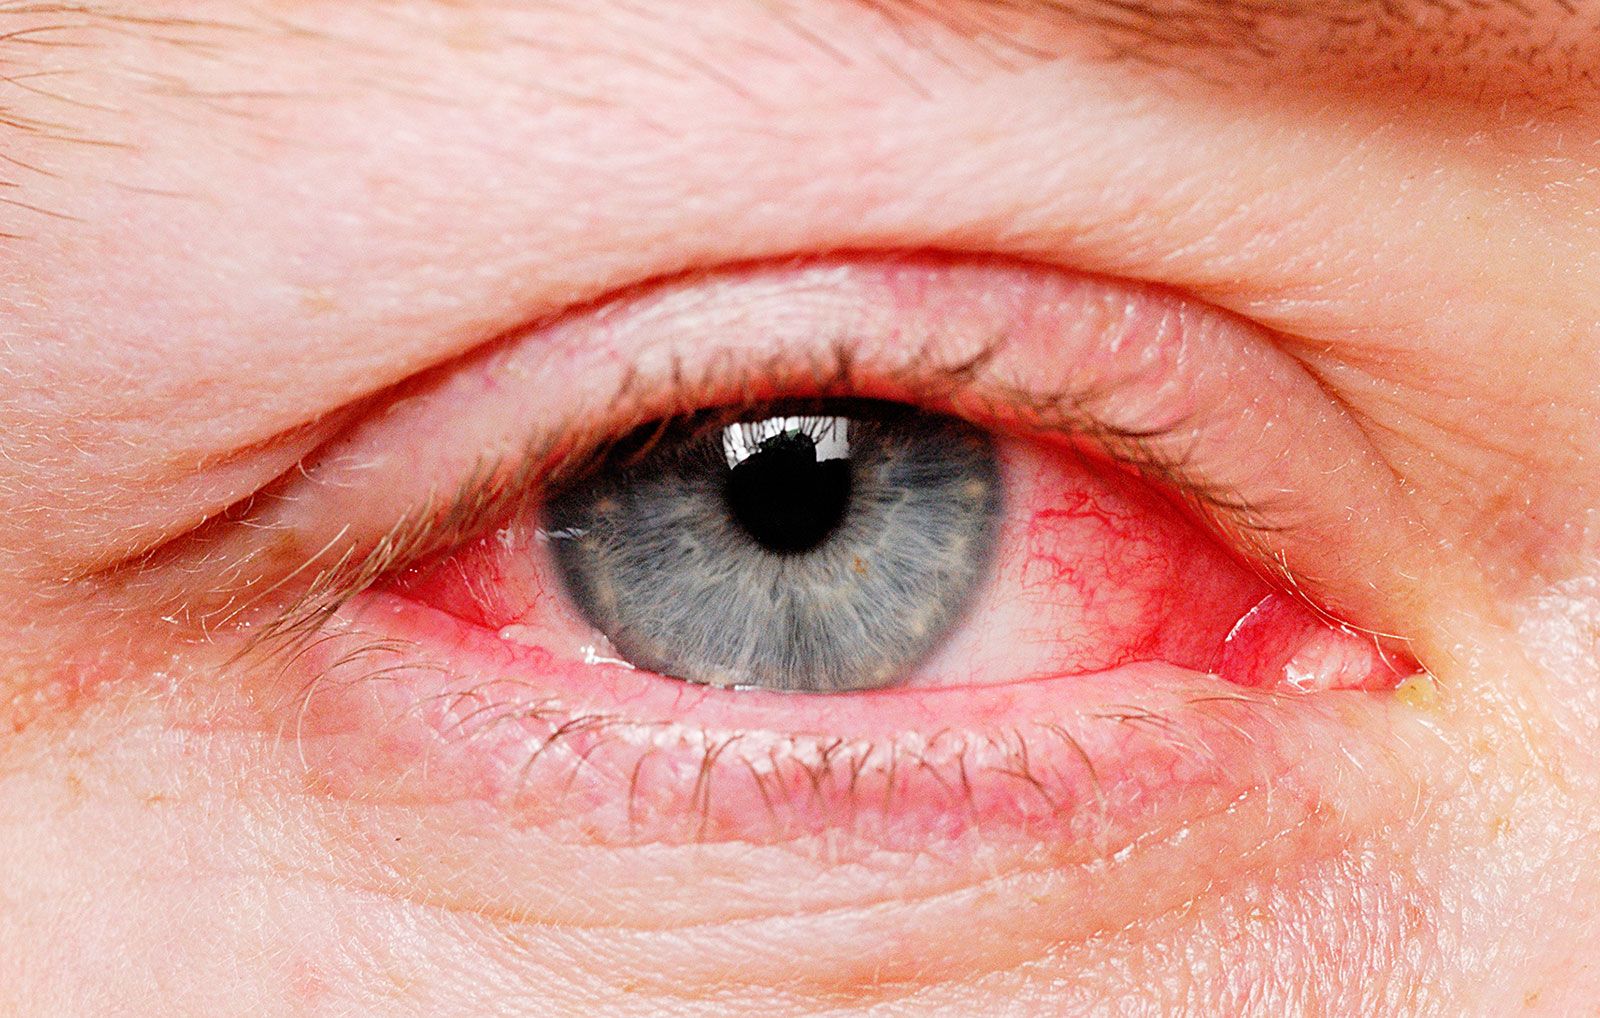 Easy Hacks to Deal and Heal Common Eye Infections